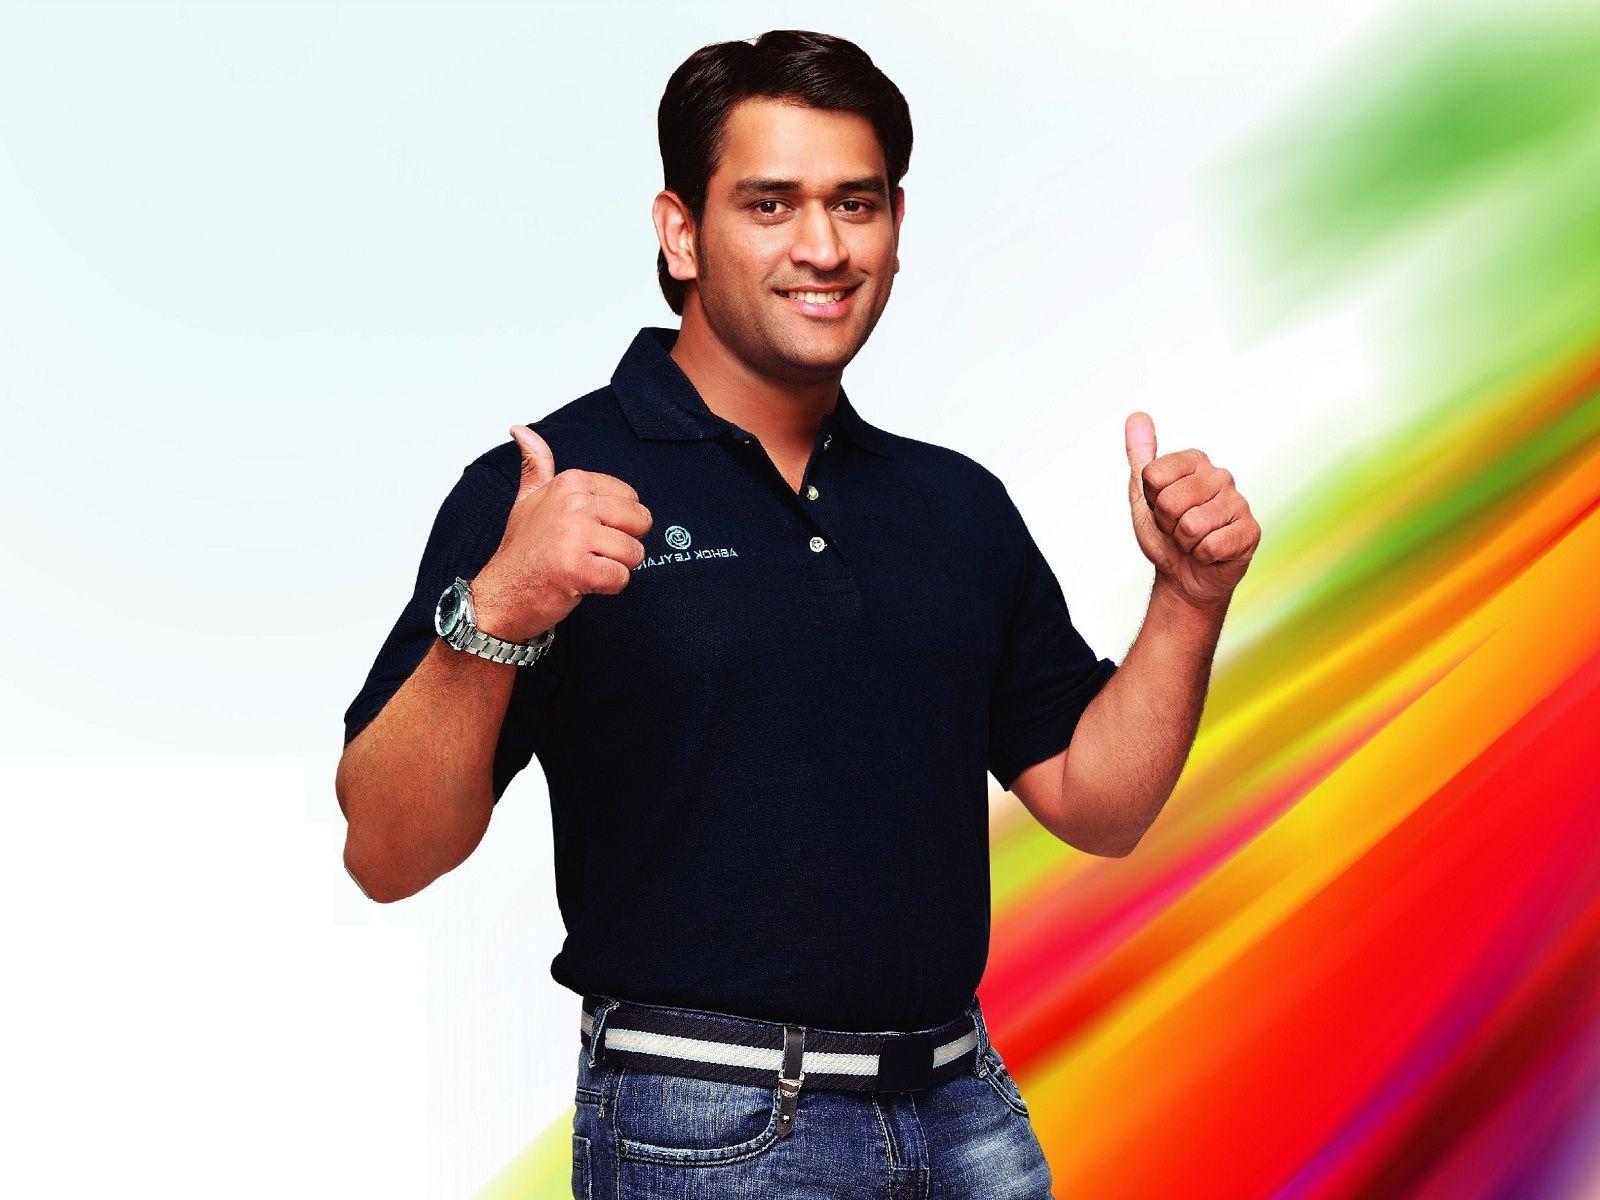 M S Dhoni Indian cricketer handsome looks